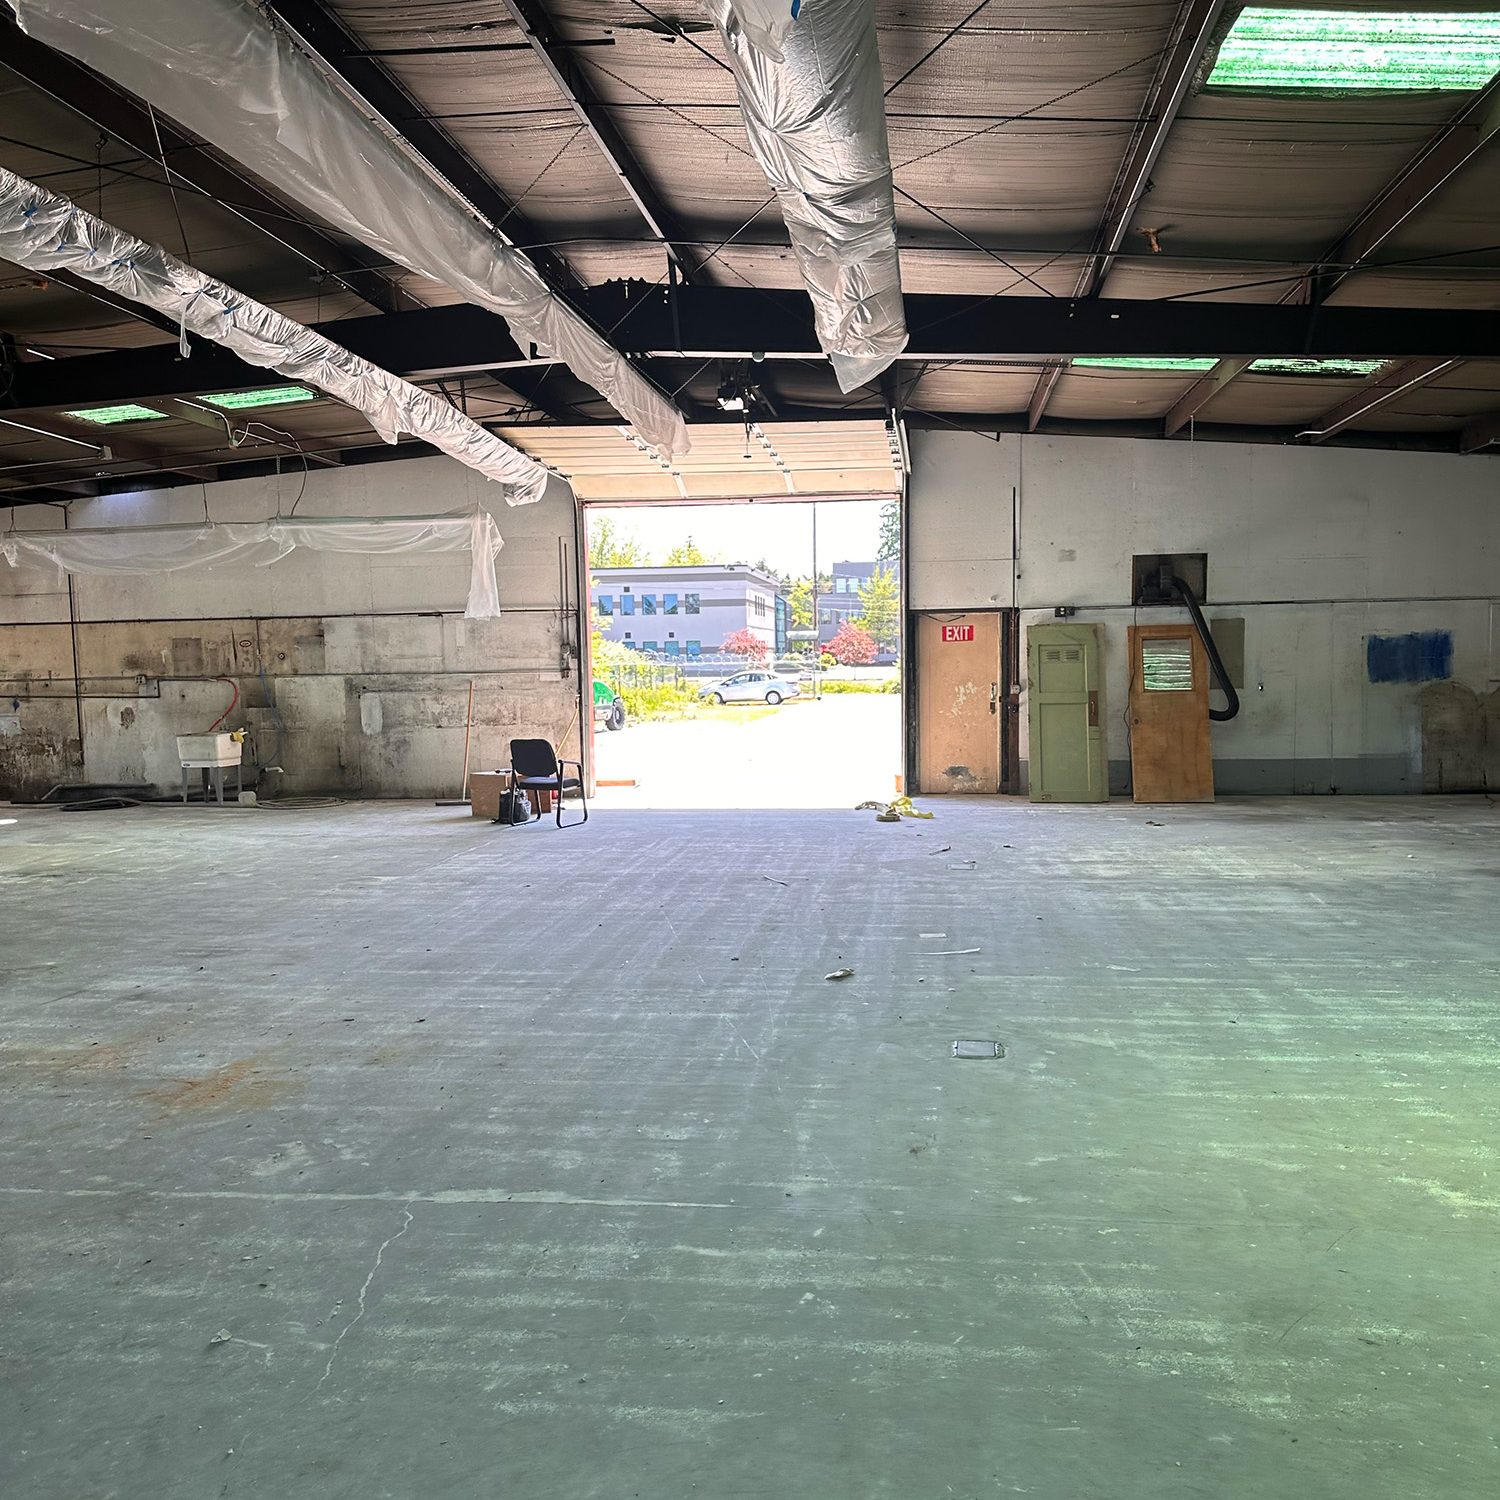 Large empty warehouse with doors open to the parking lot